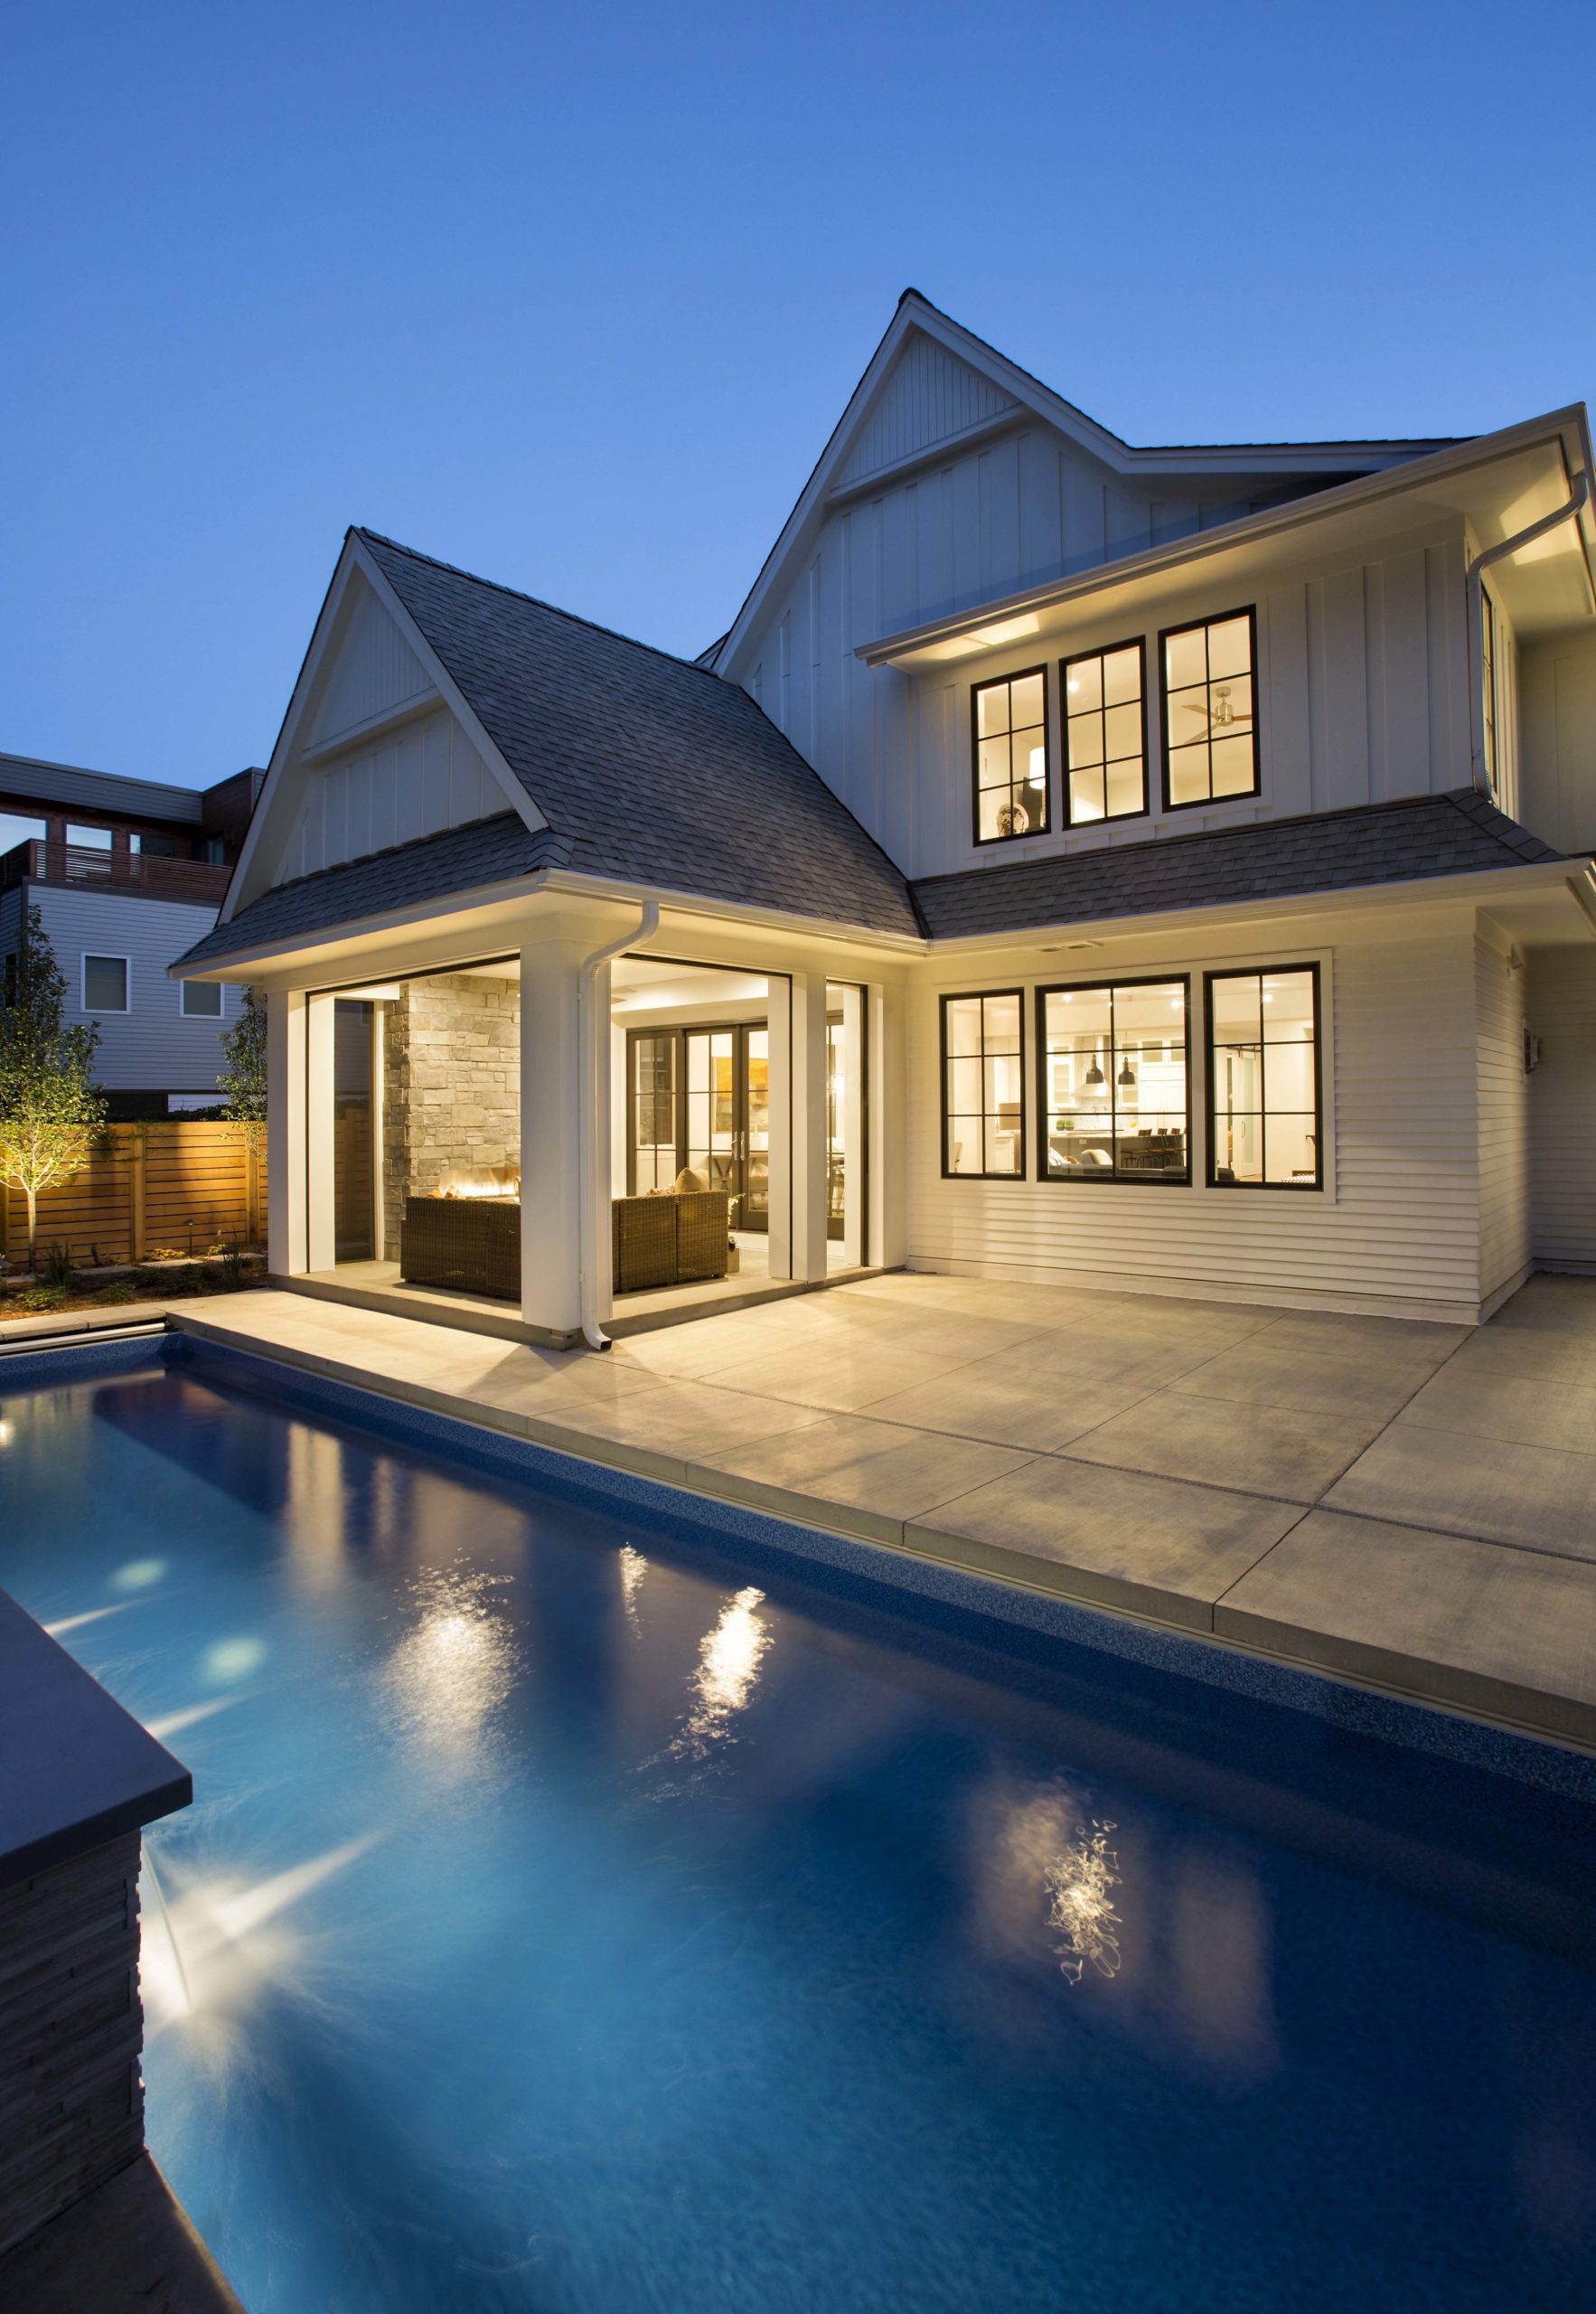 A modern home with a swimming pool at dusk.